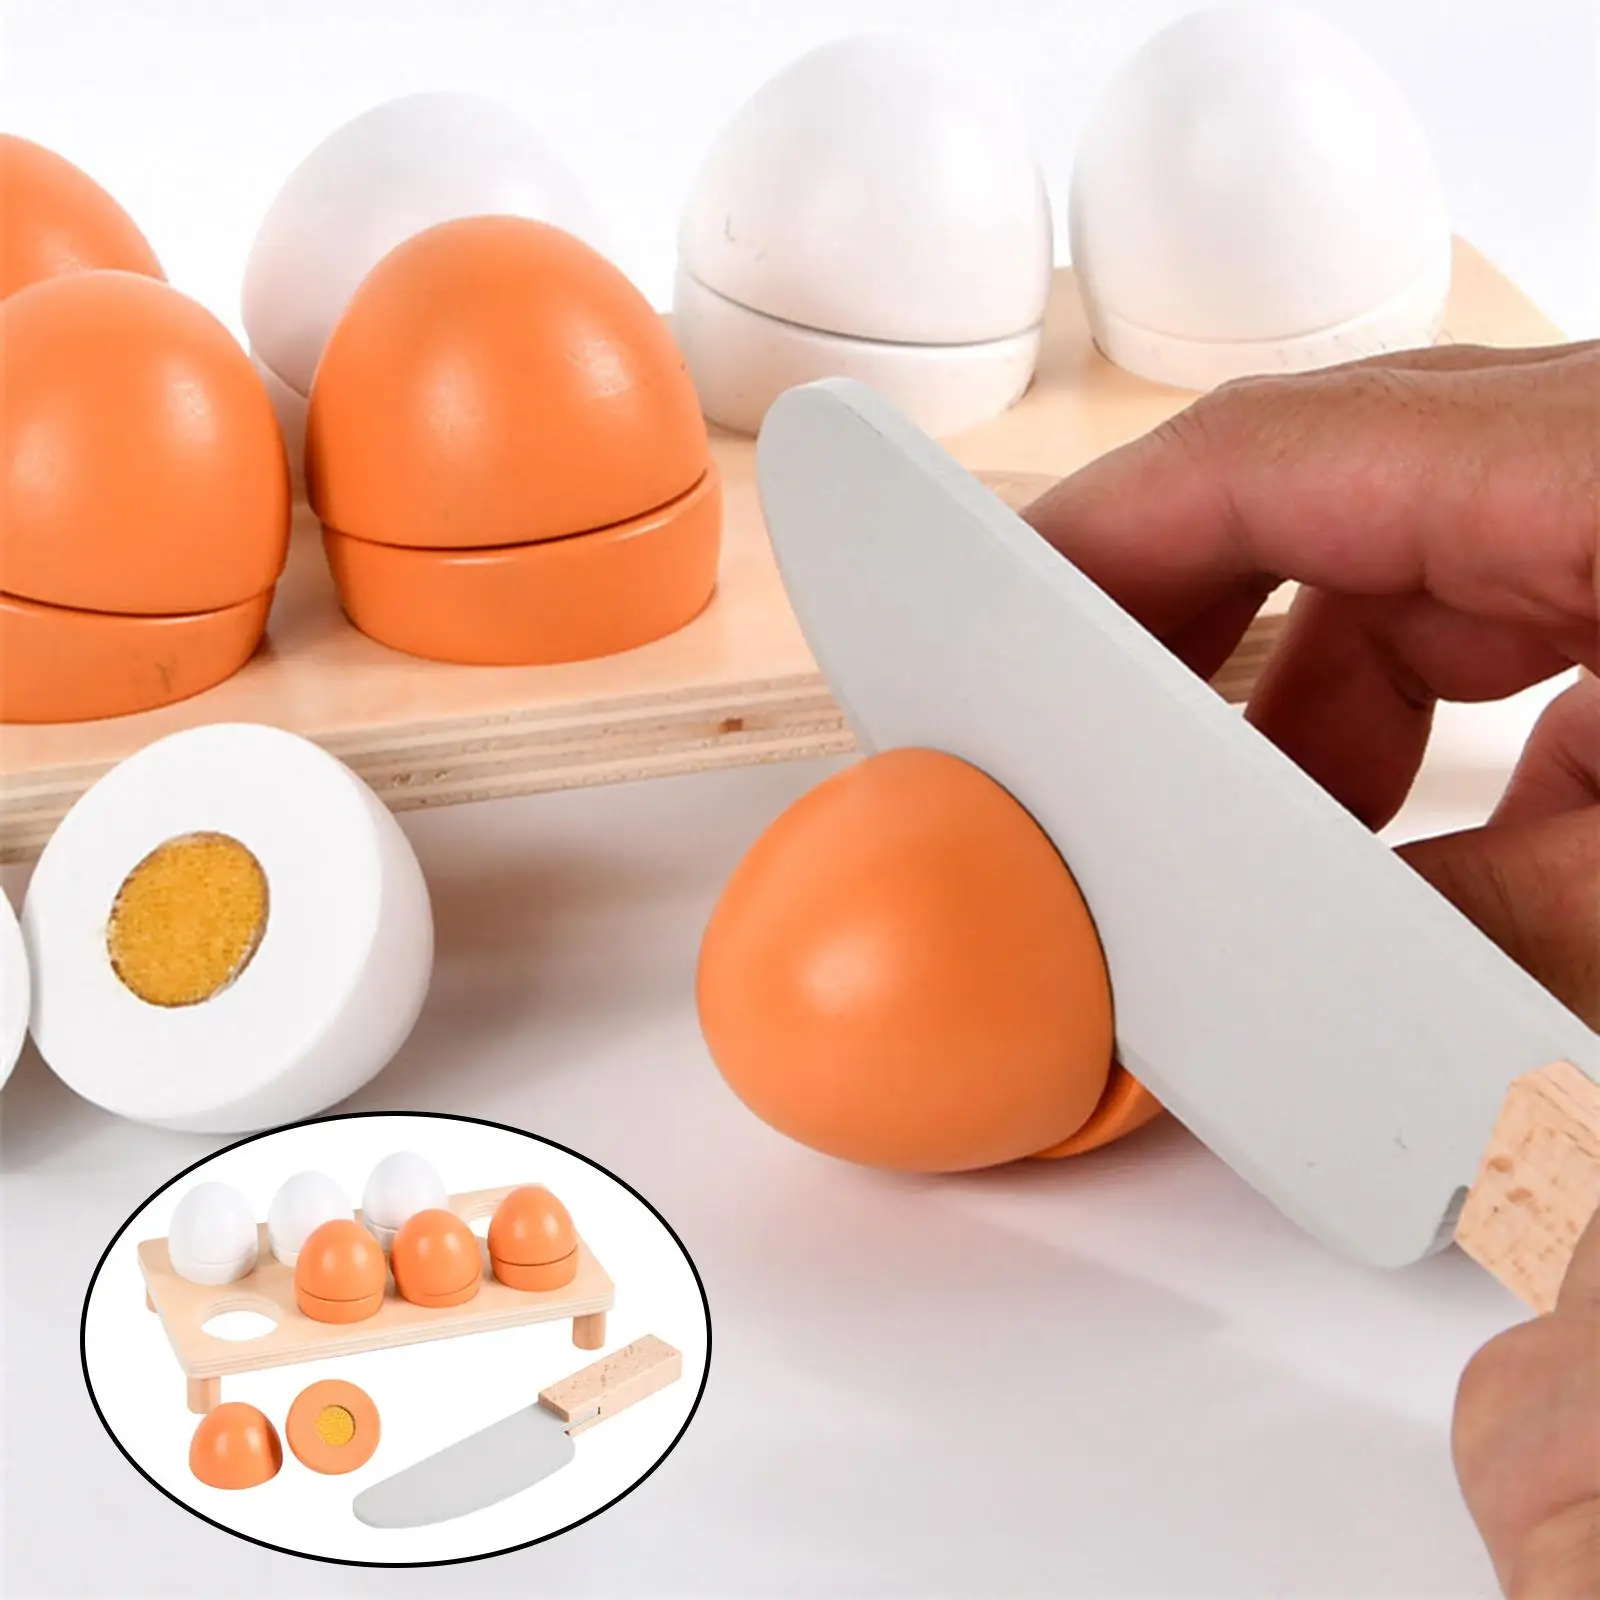 Pretend Kitchen Food Toy Educational Toy for Kids and Toddlers Wooden Realistic Educational Toy